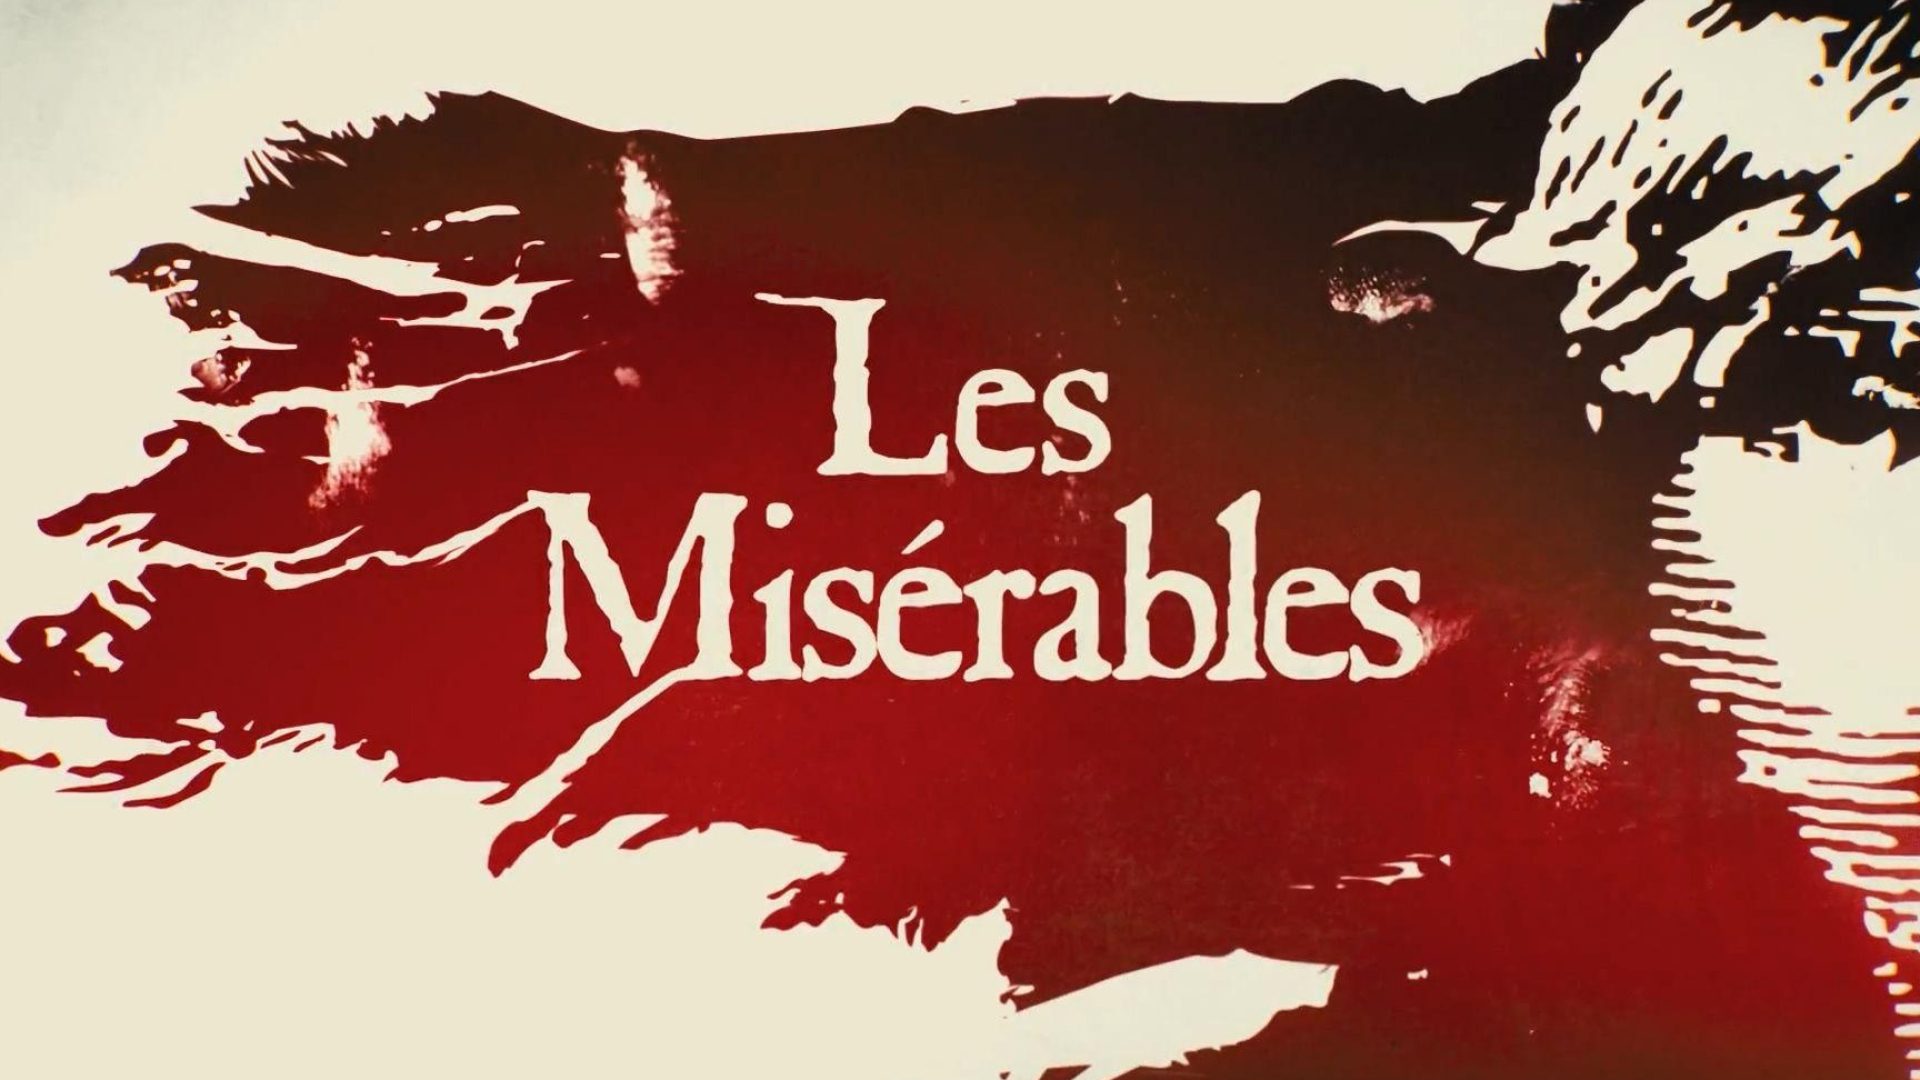 Les Miserables: Claude-Michel Schonberg wrote the music, 2012 movie. 1920x1080 Full HD Background.